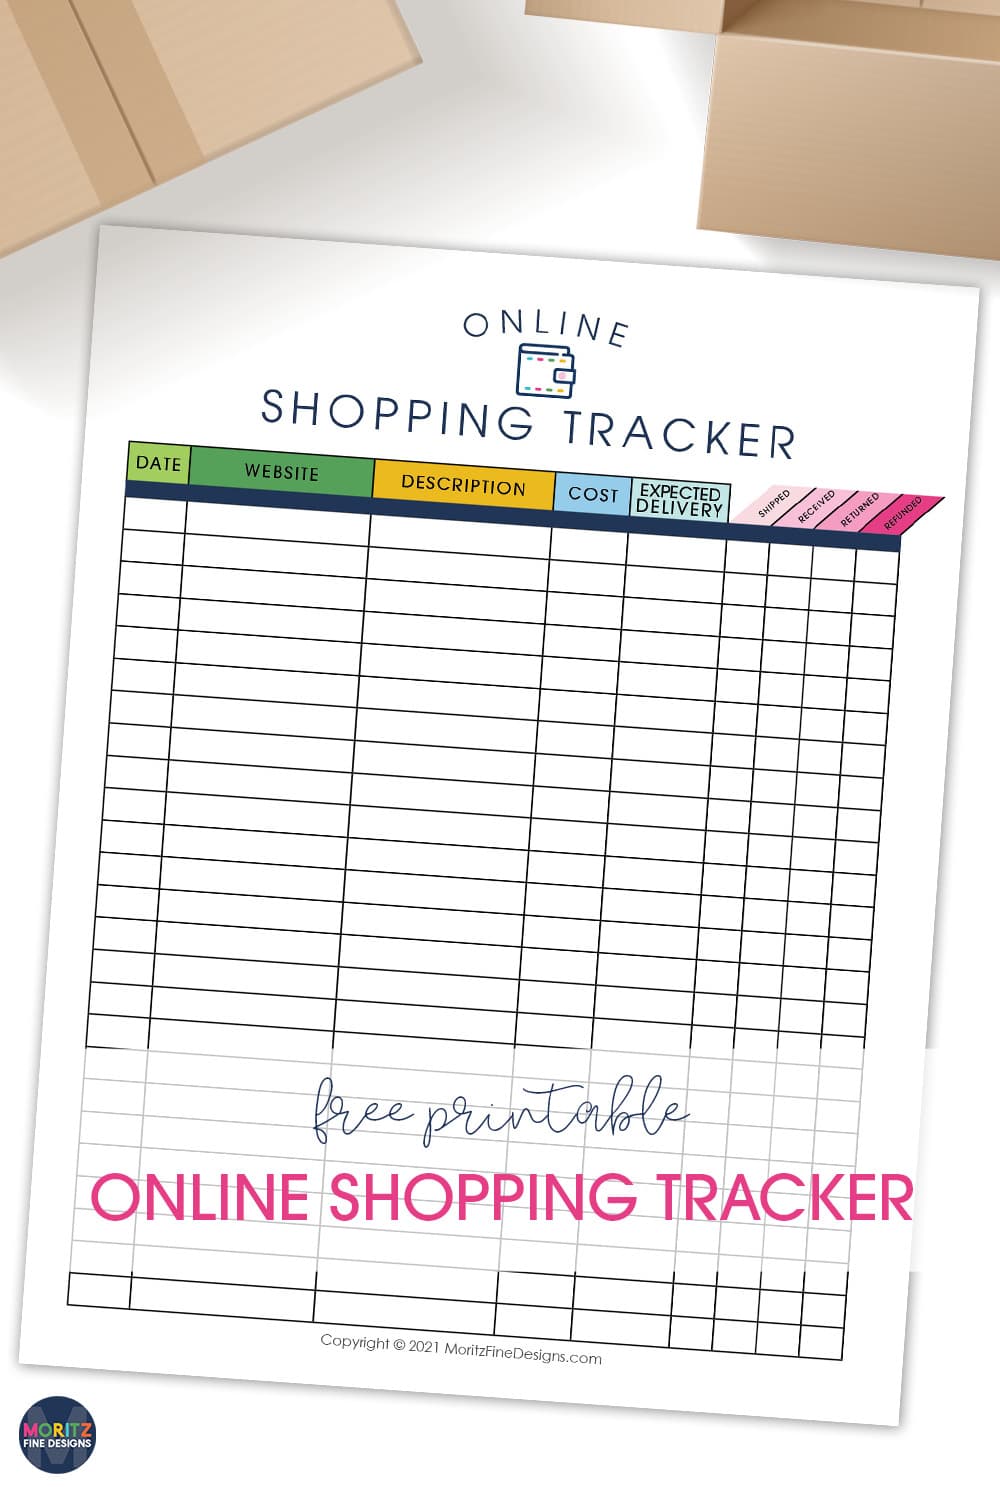 Manage, organize, and keep track of all your online purchases with the free printable Online Shopping Tracker.